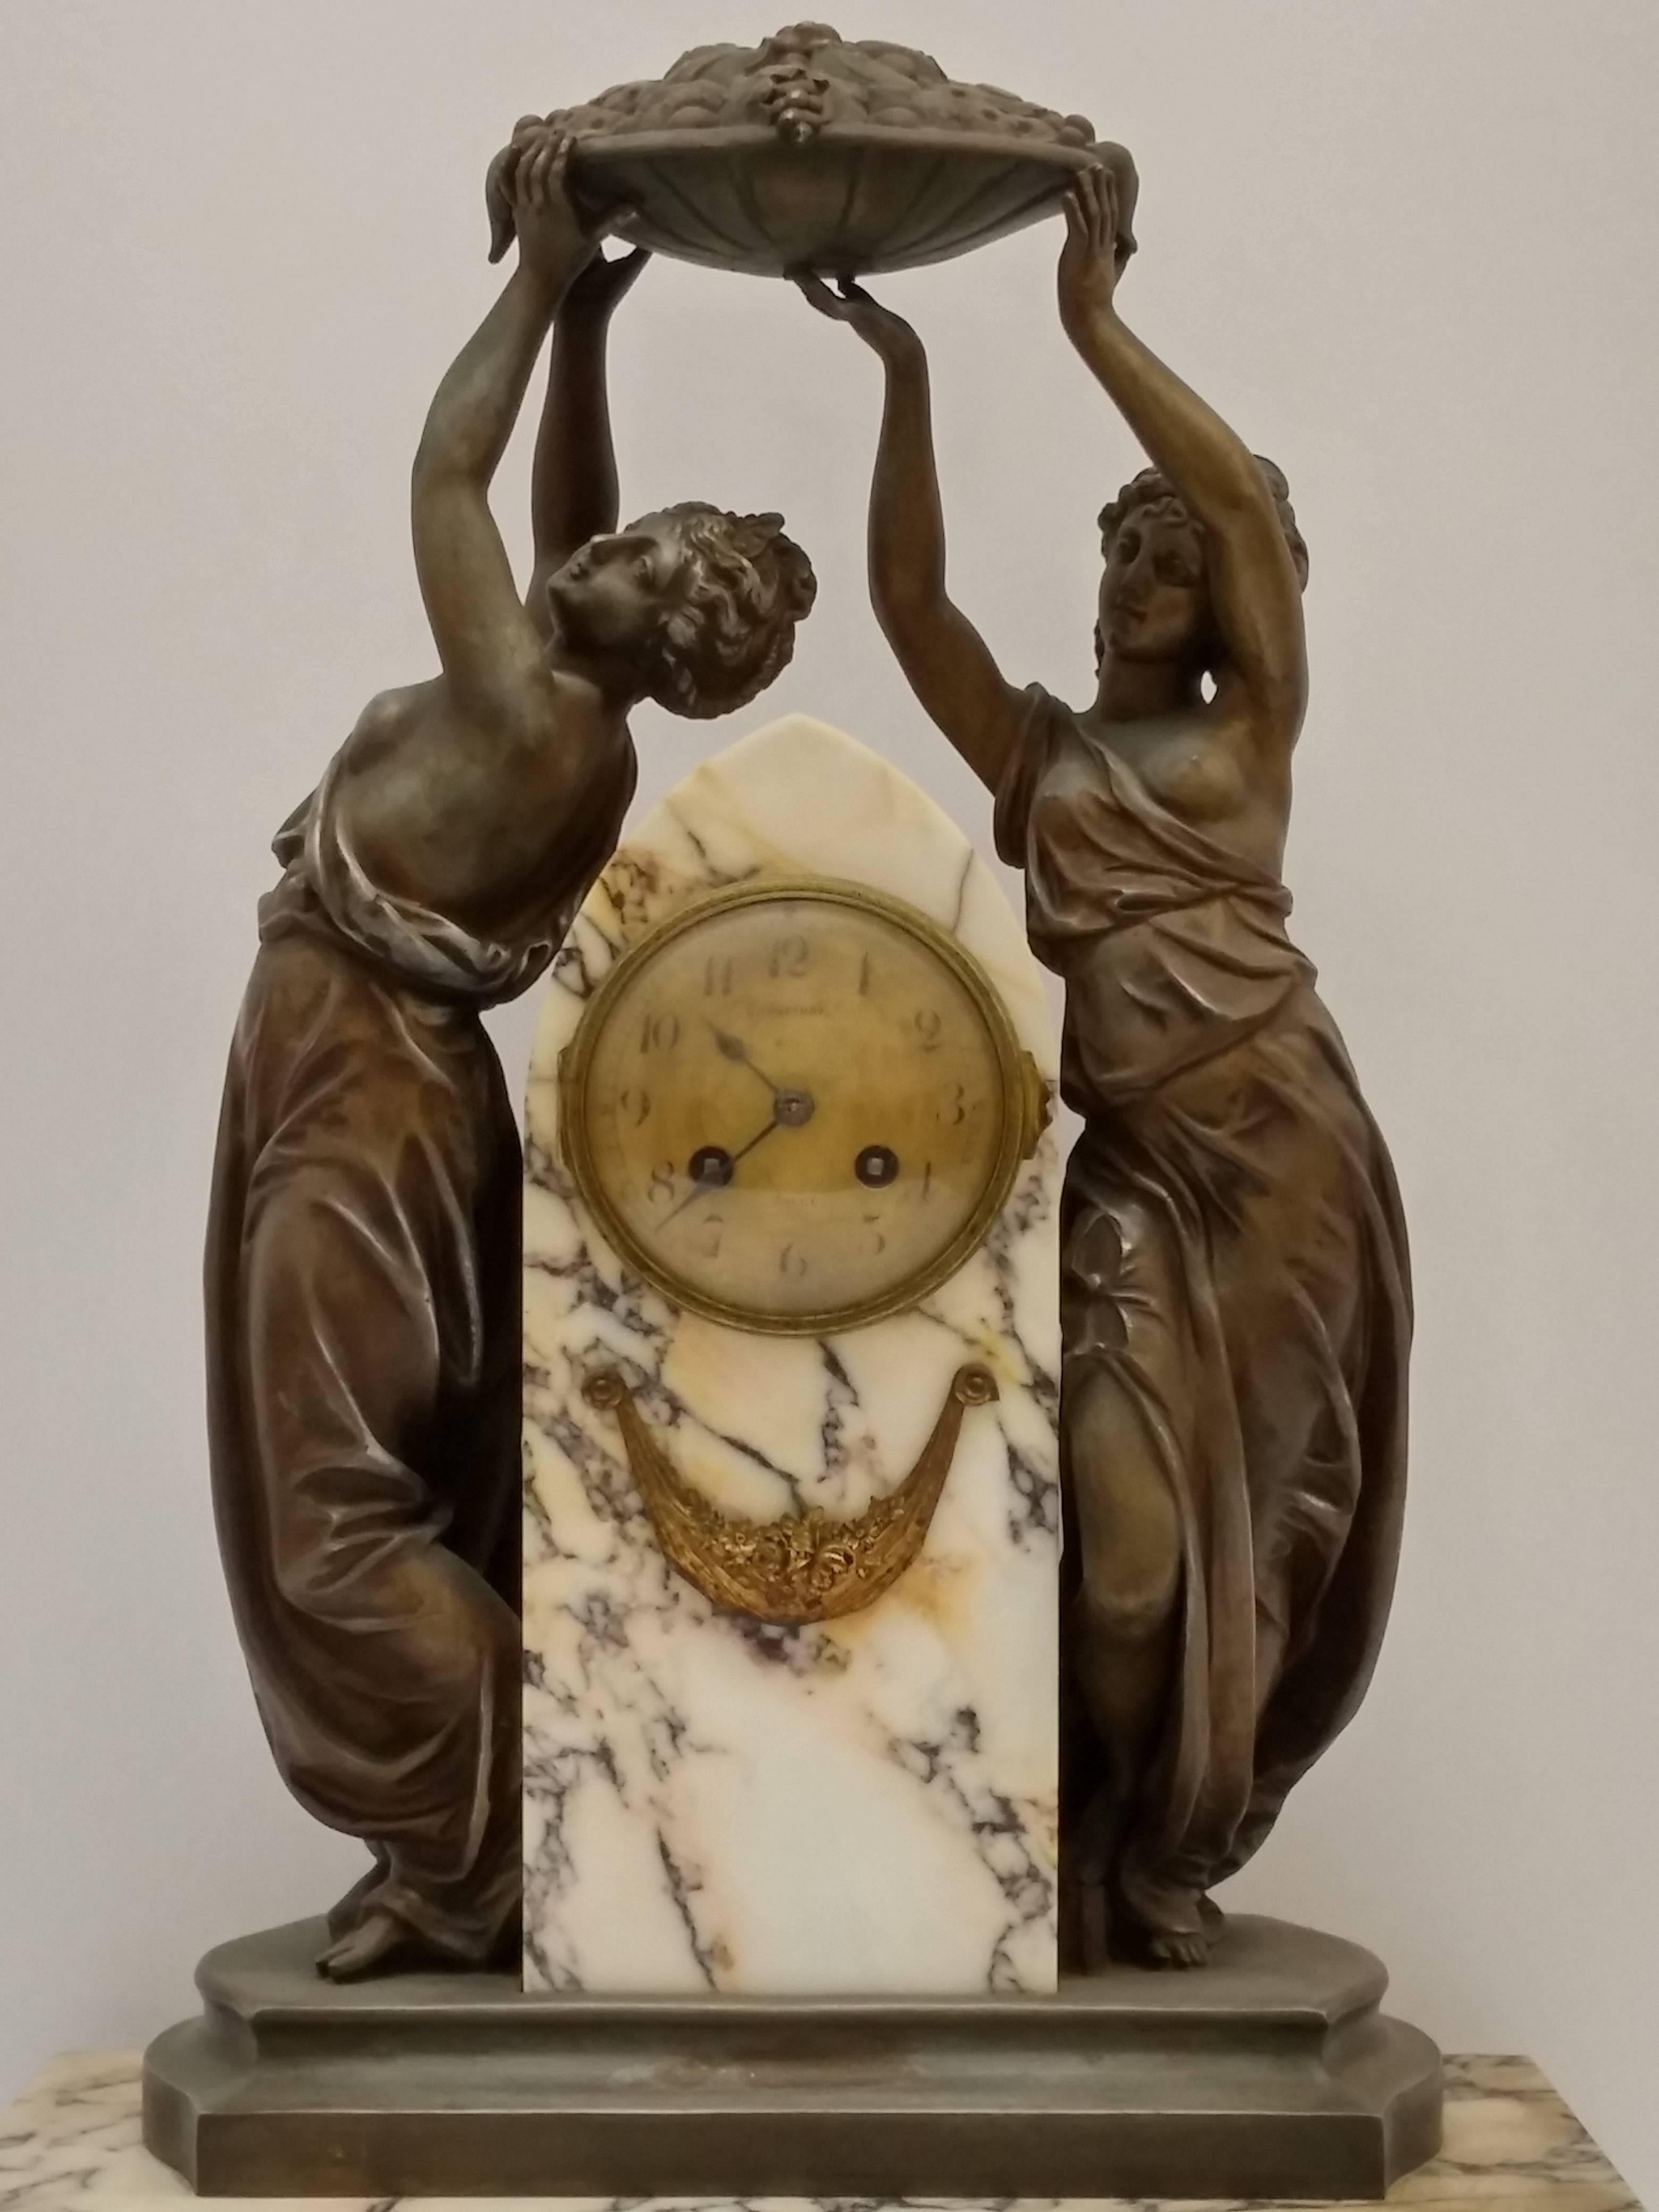 French Art Nouveau sculpture with a clock decorated with a pair of women rejoicing in the season's harvest. In great condition. Sold as is regarding the movement. Complimentary drop-off to the tri-state area. We are the rare source that has